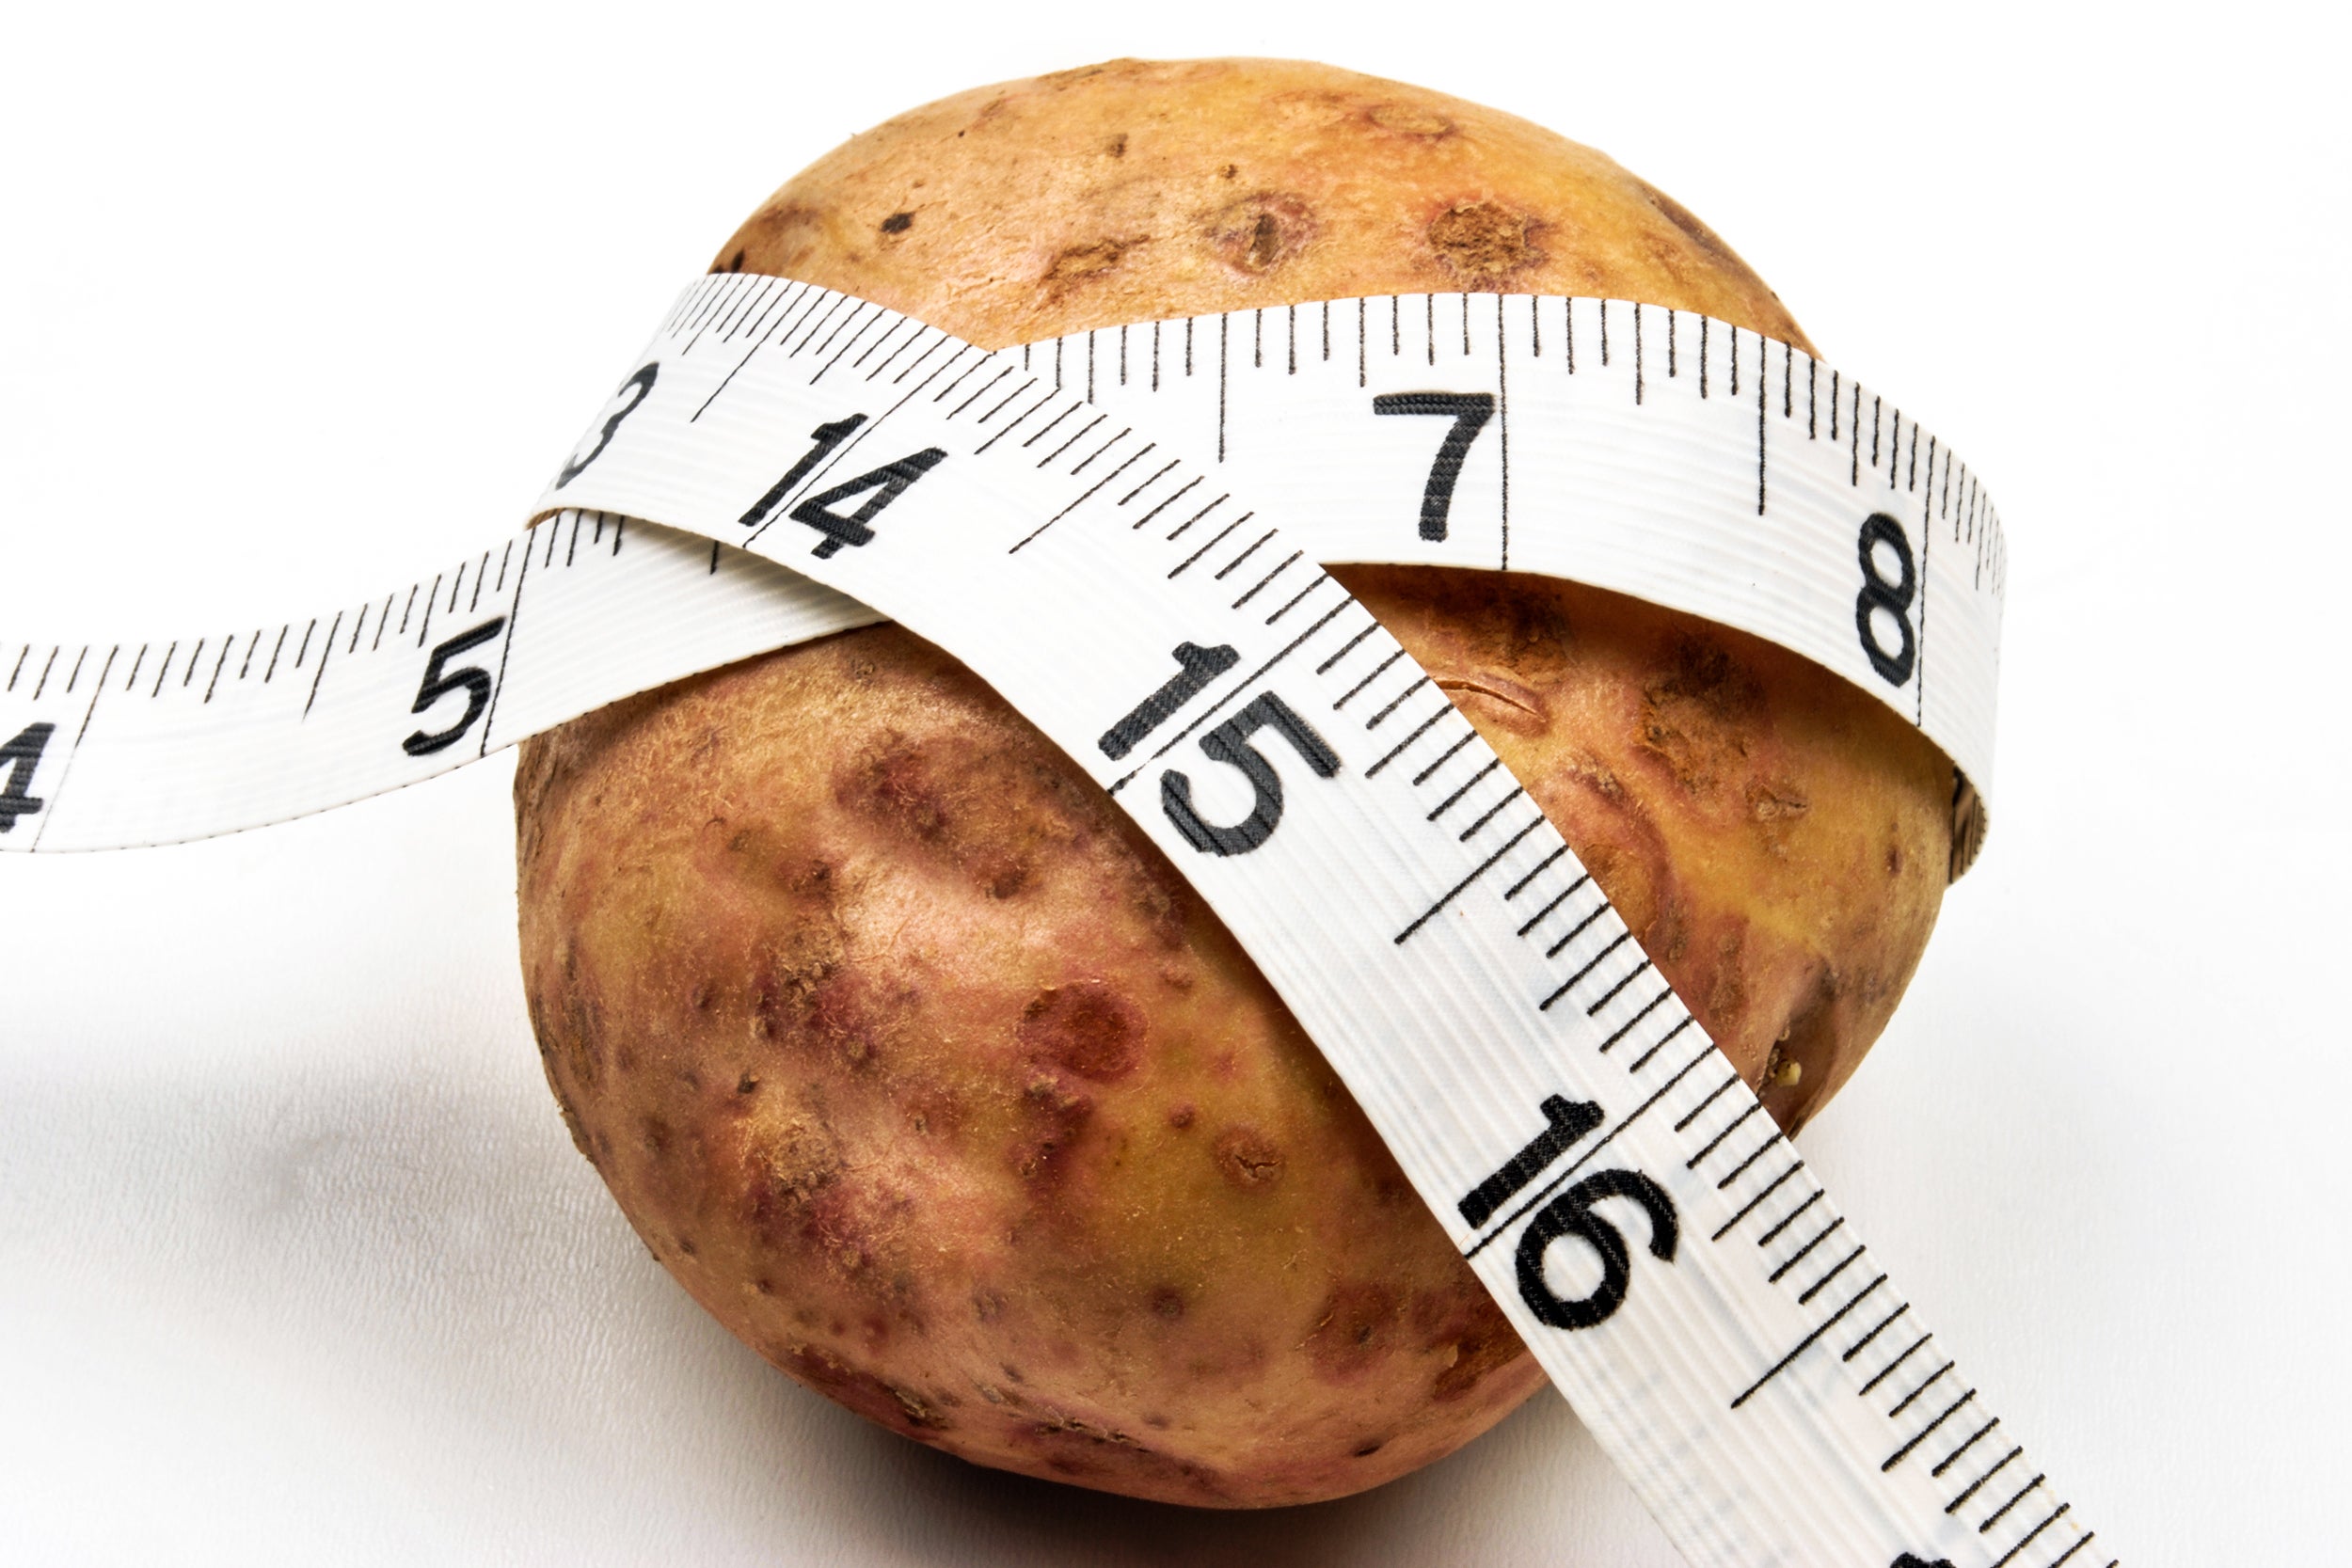 The problem with potatoes, The Nutrition Source